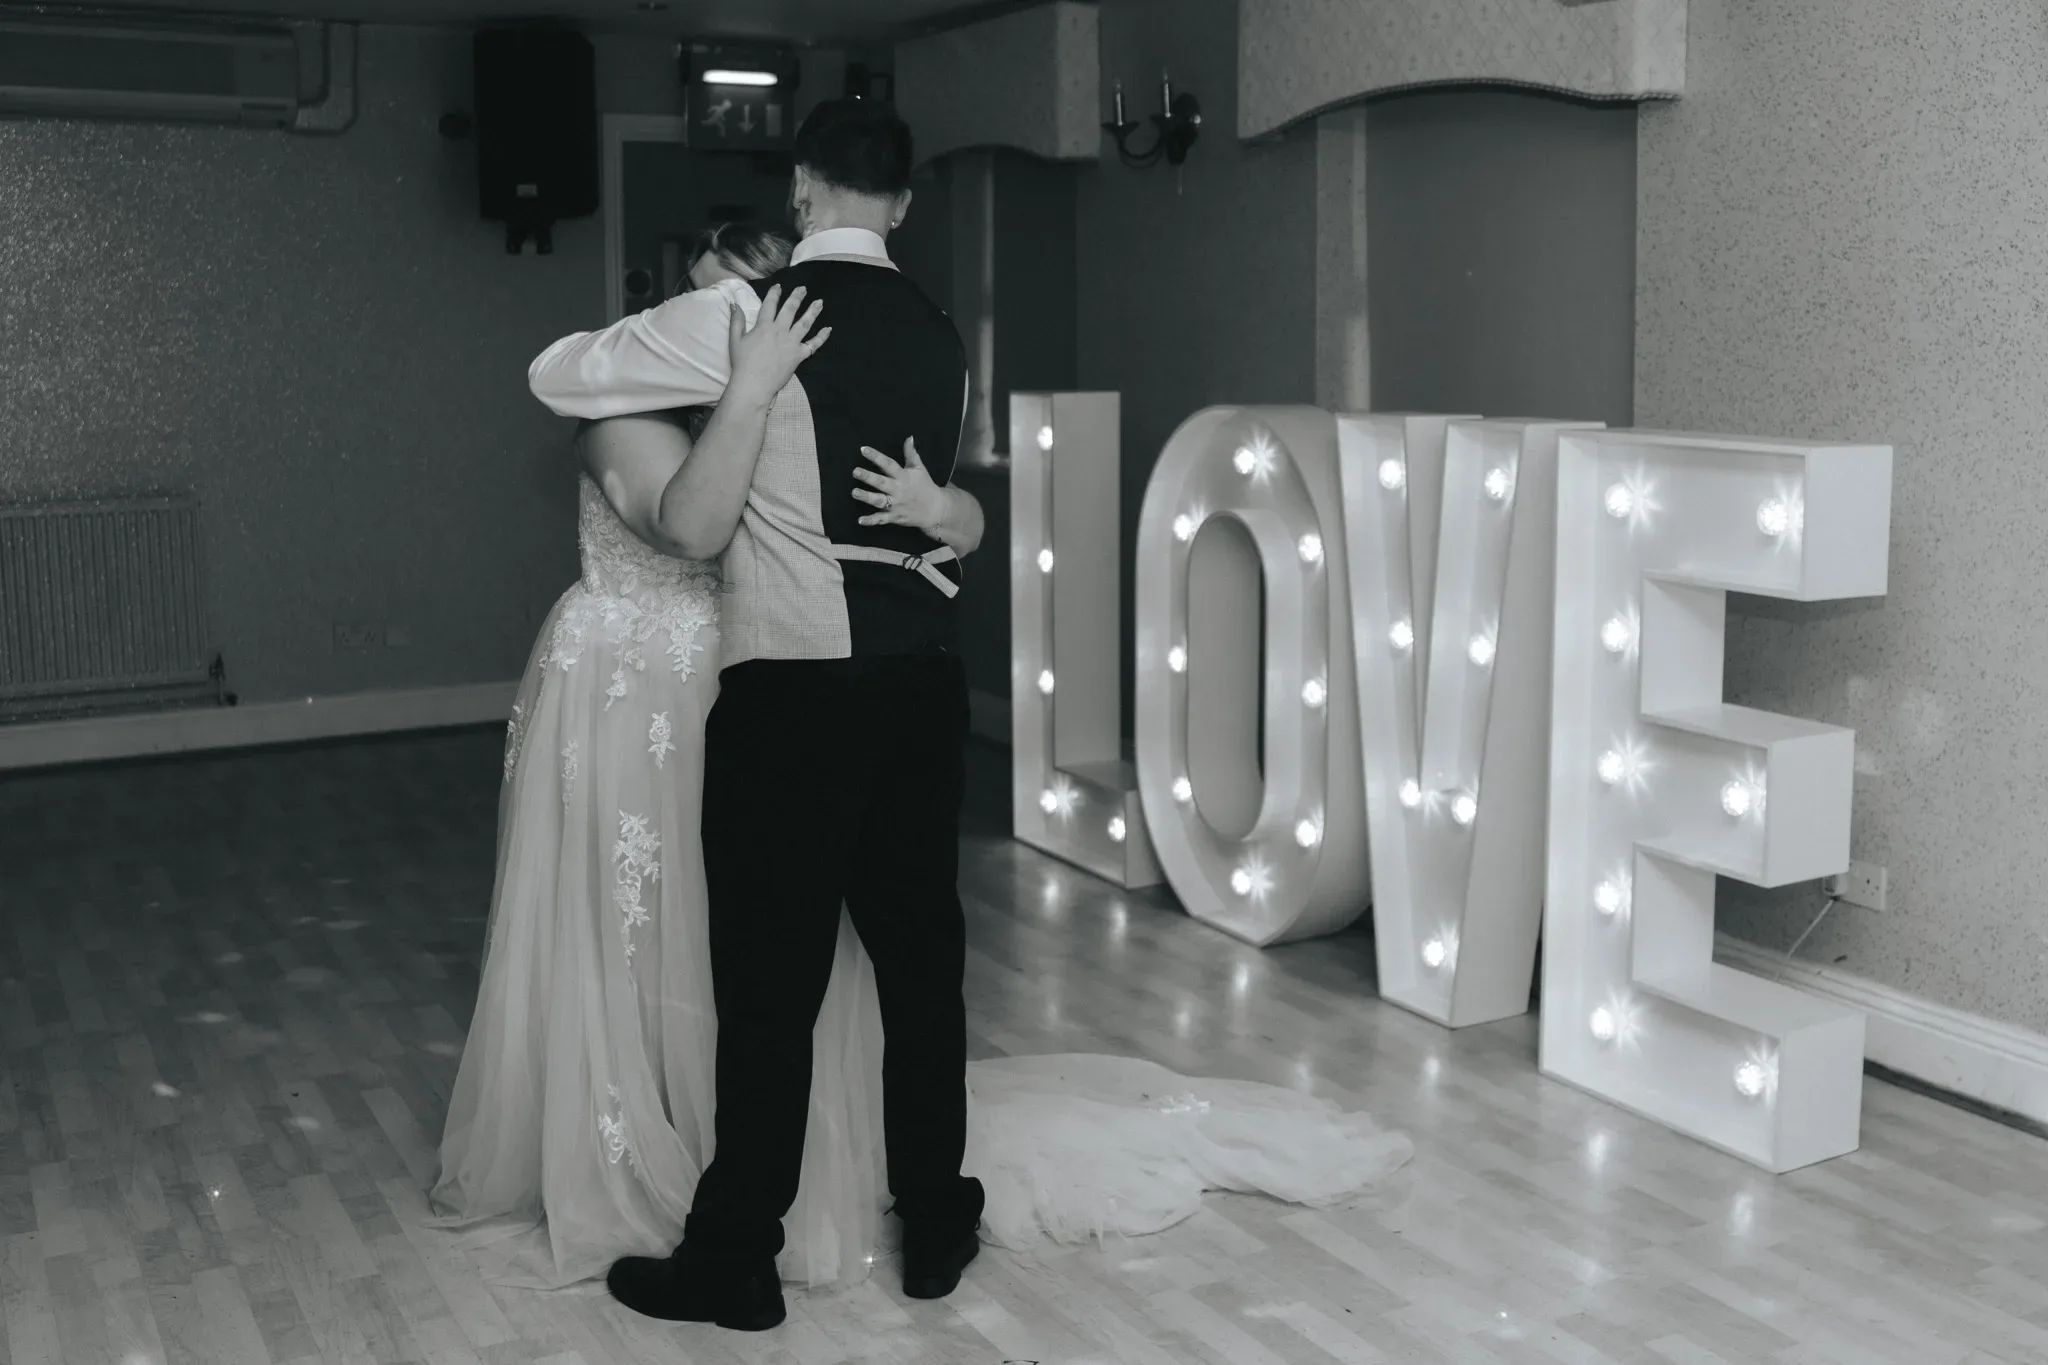 A couple shares a slow dance at their wedding reception, surrounded by large illuminated letters spelling "love." the bride, in a long gown with a train, embraces the groom from behind. the venue has a simple, elegant decor.